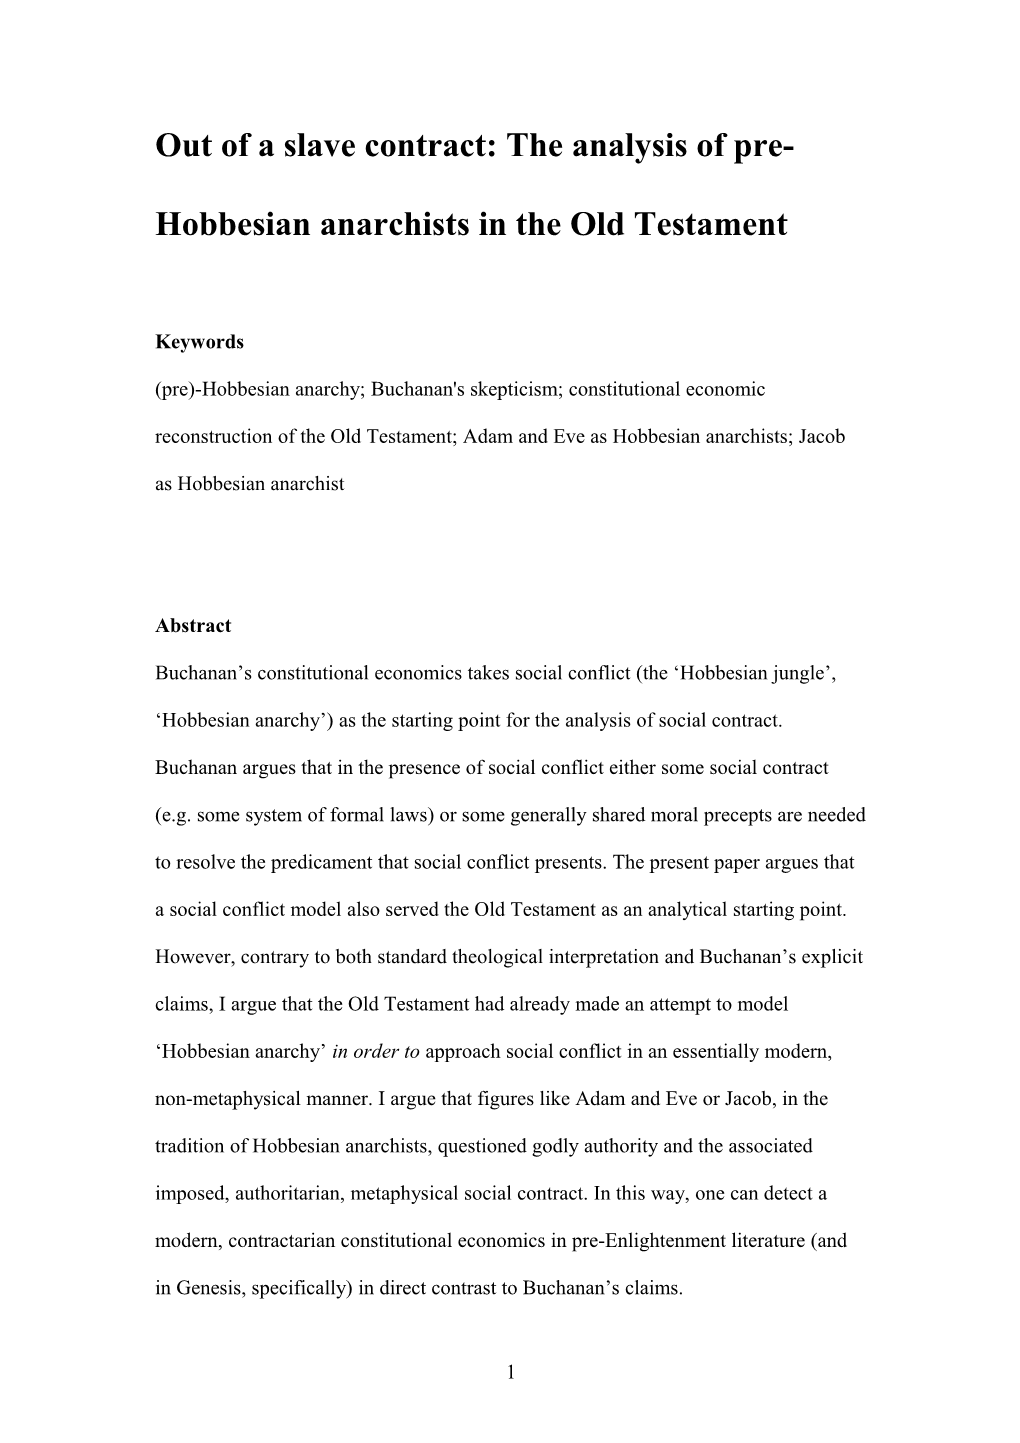 Out of a Slave Contract: on the Analysis of Pre-Hobbesian Anarchy in the Old Testament